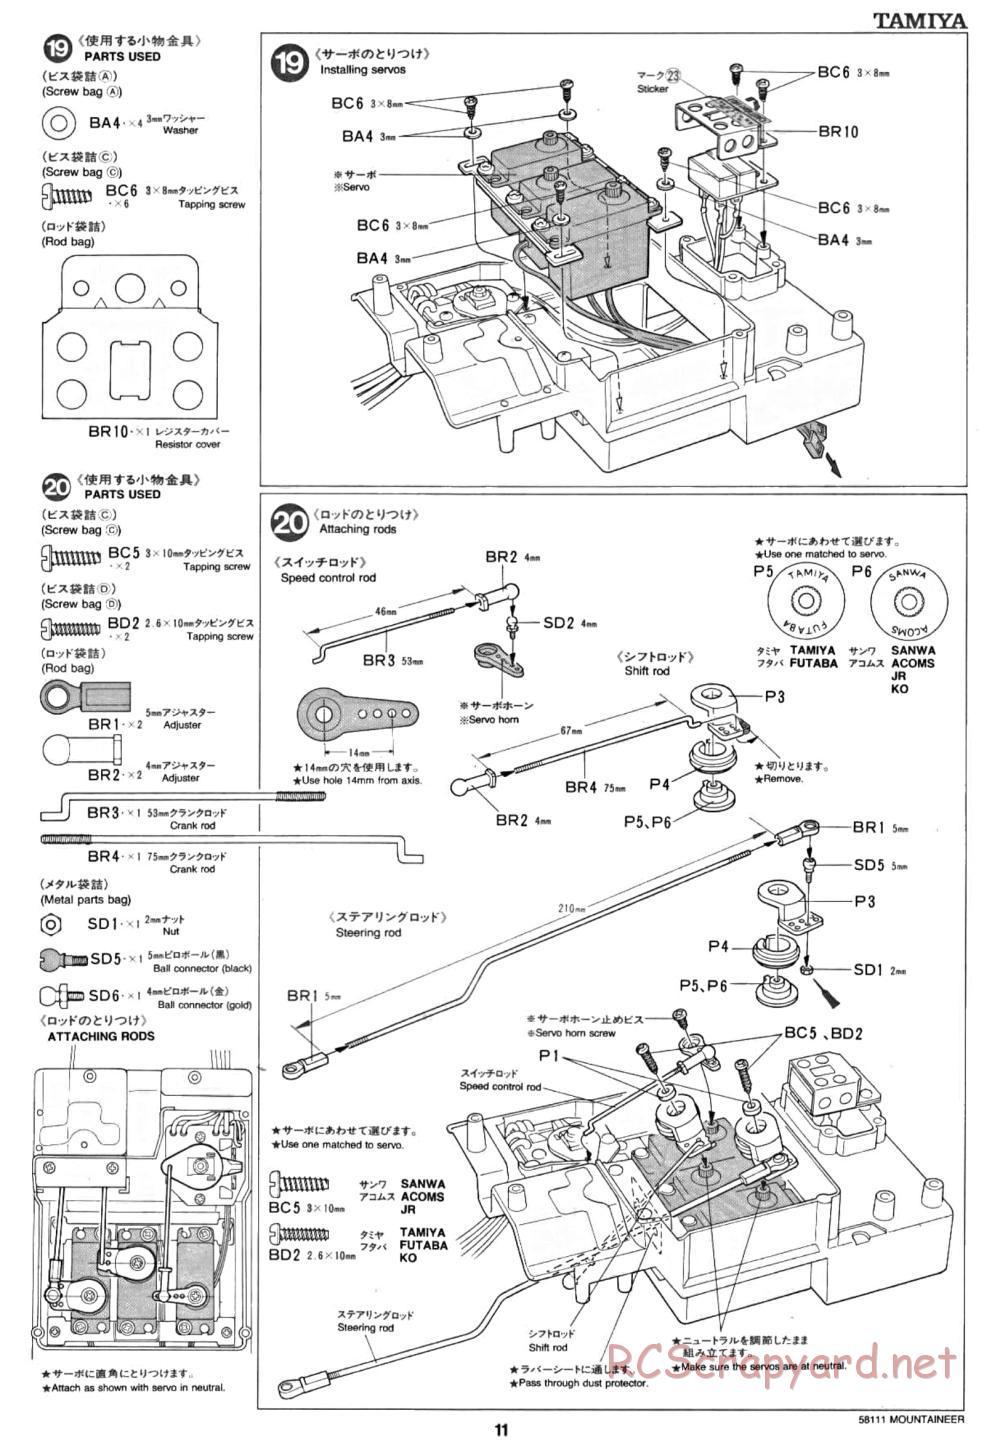 Tamiya - Toyota 4x4 Pick Up Mountaineer Chassis - Manual - Page 11